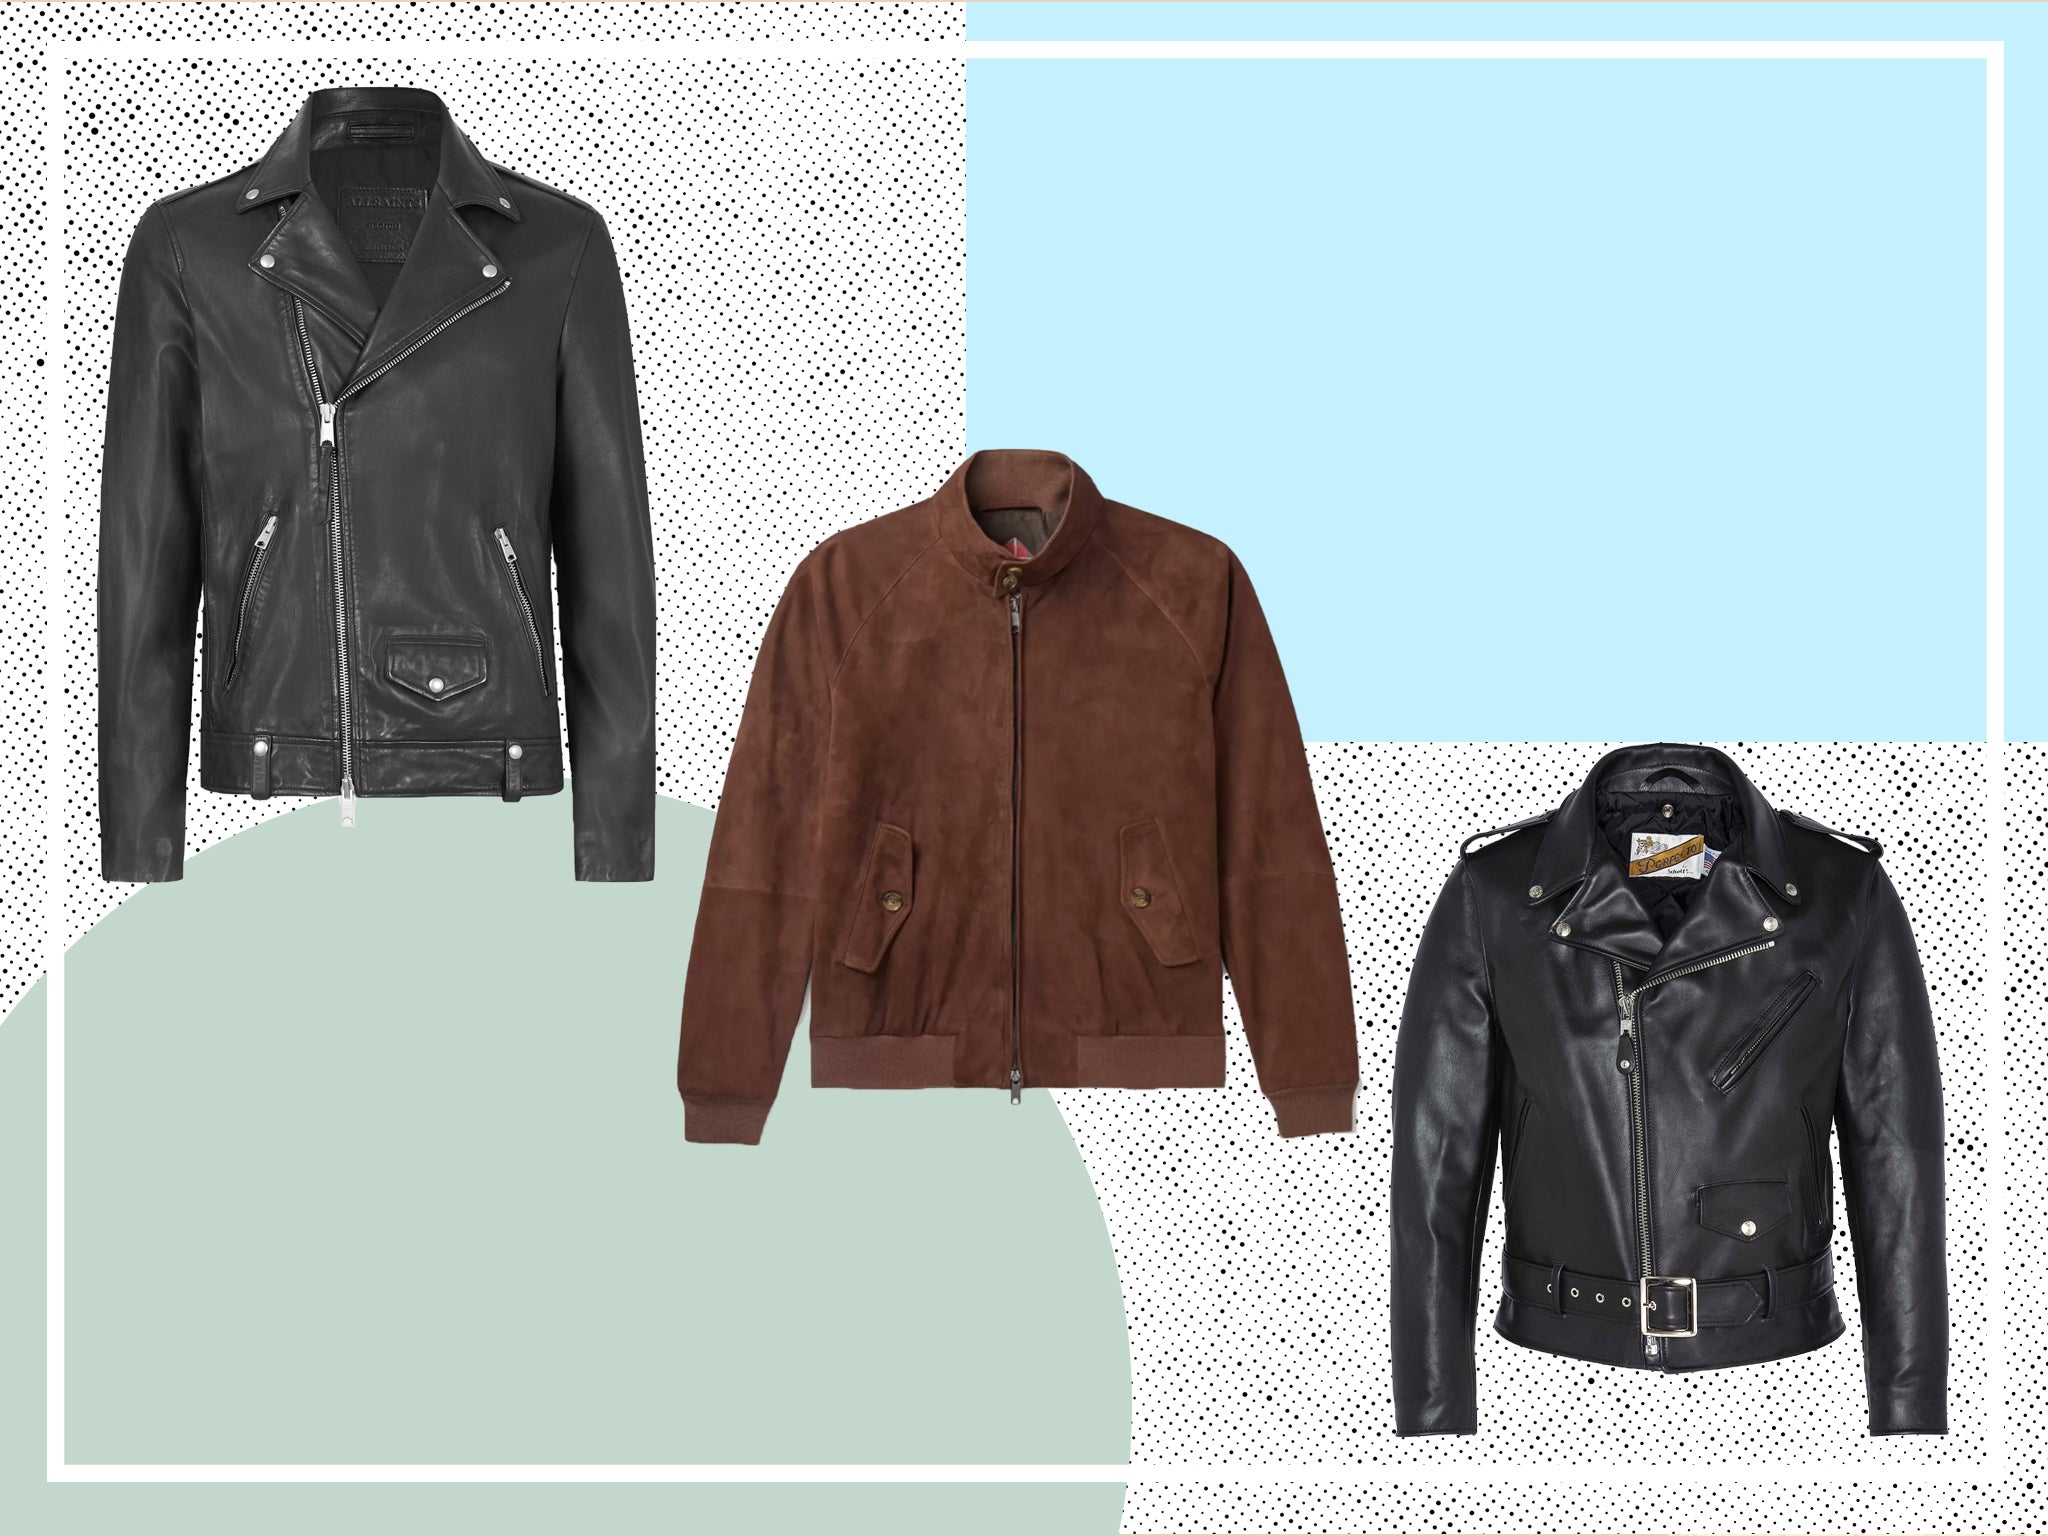 Best men's leather jackets 2021: From designer to high street